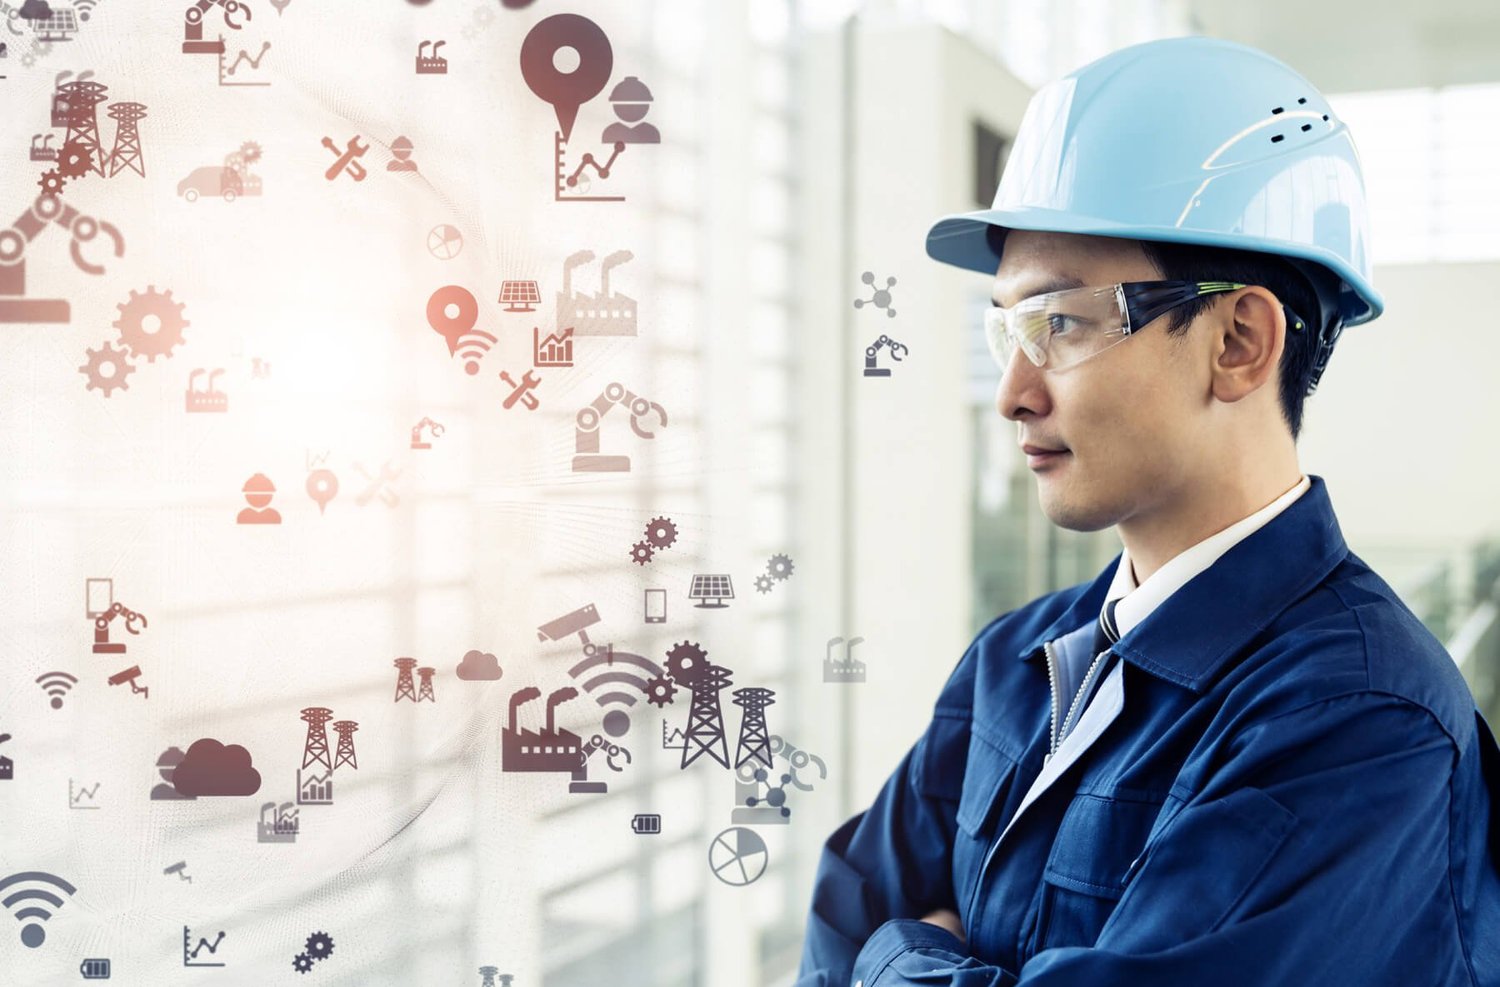 Improve Operations and Maintenance Processes with IoT